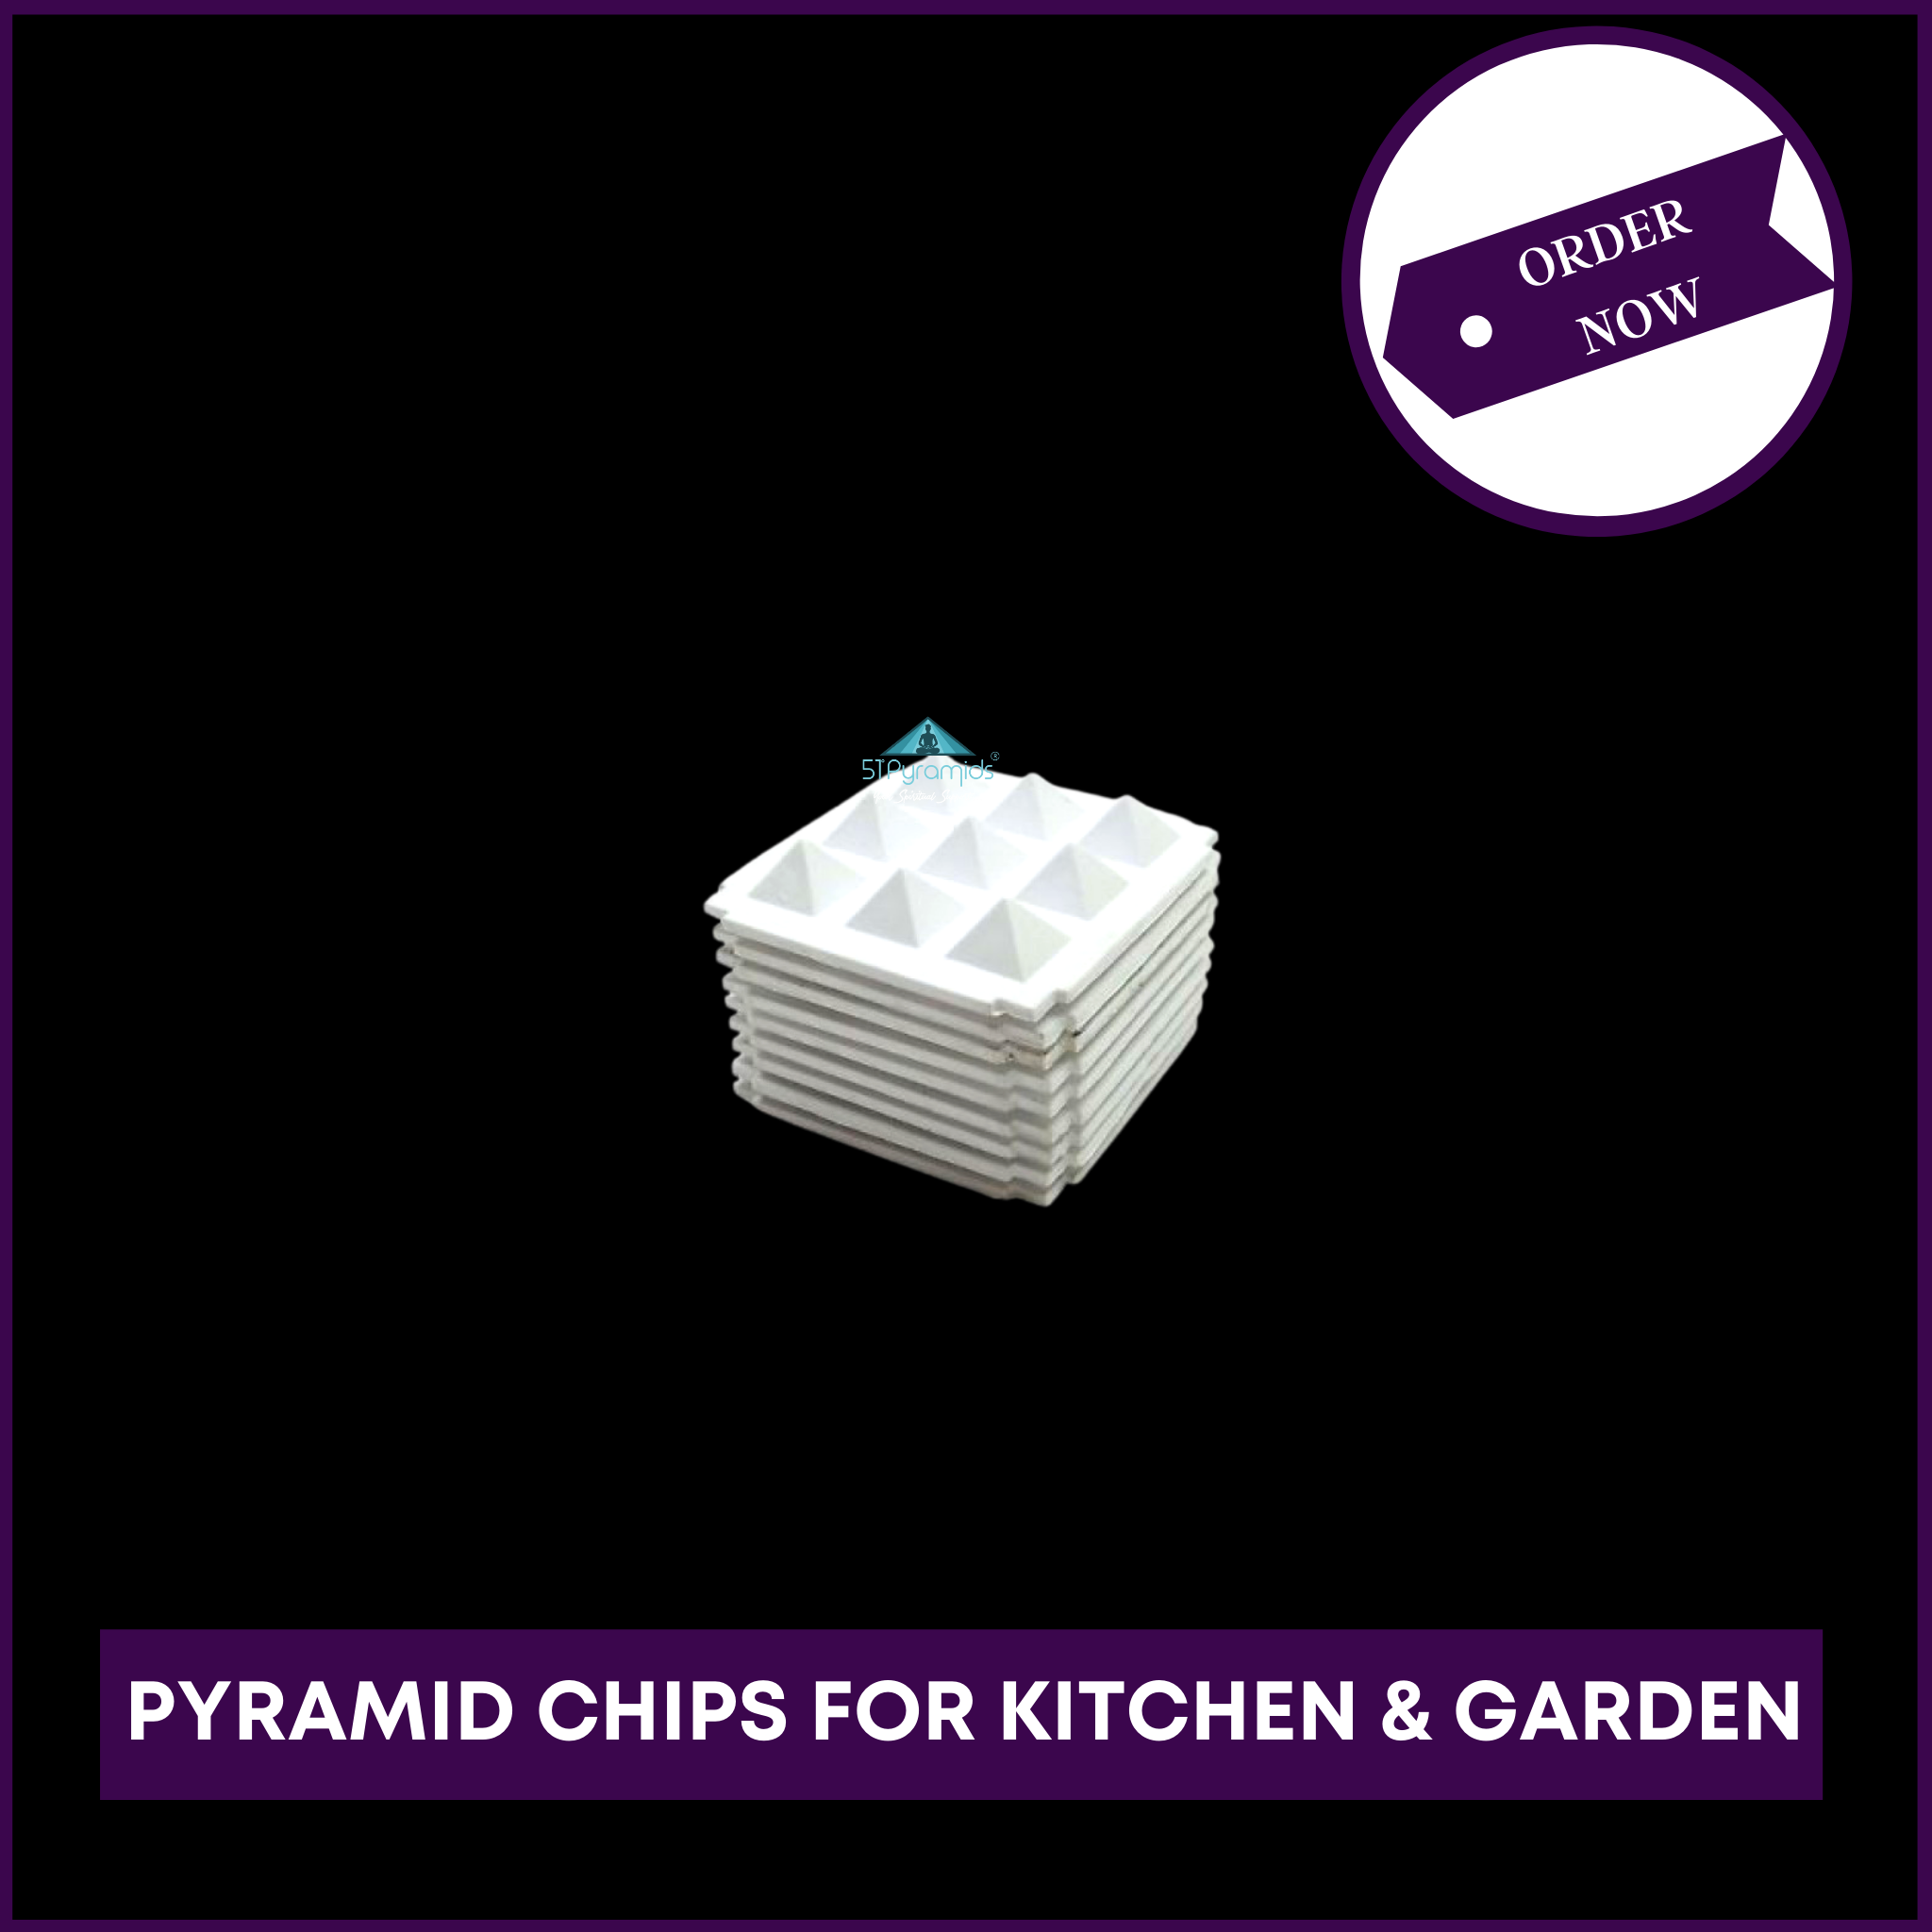 Pyramid Chips For Daily Kitchen & Garden Use - (Set of 27) - 51pyramids